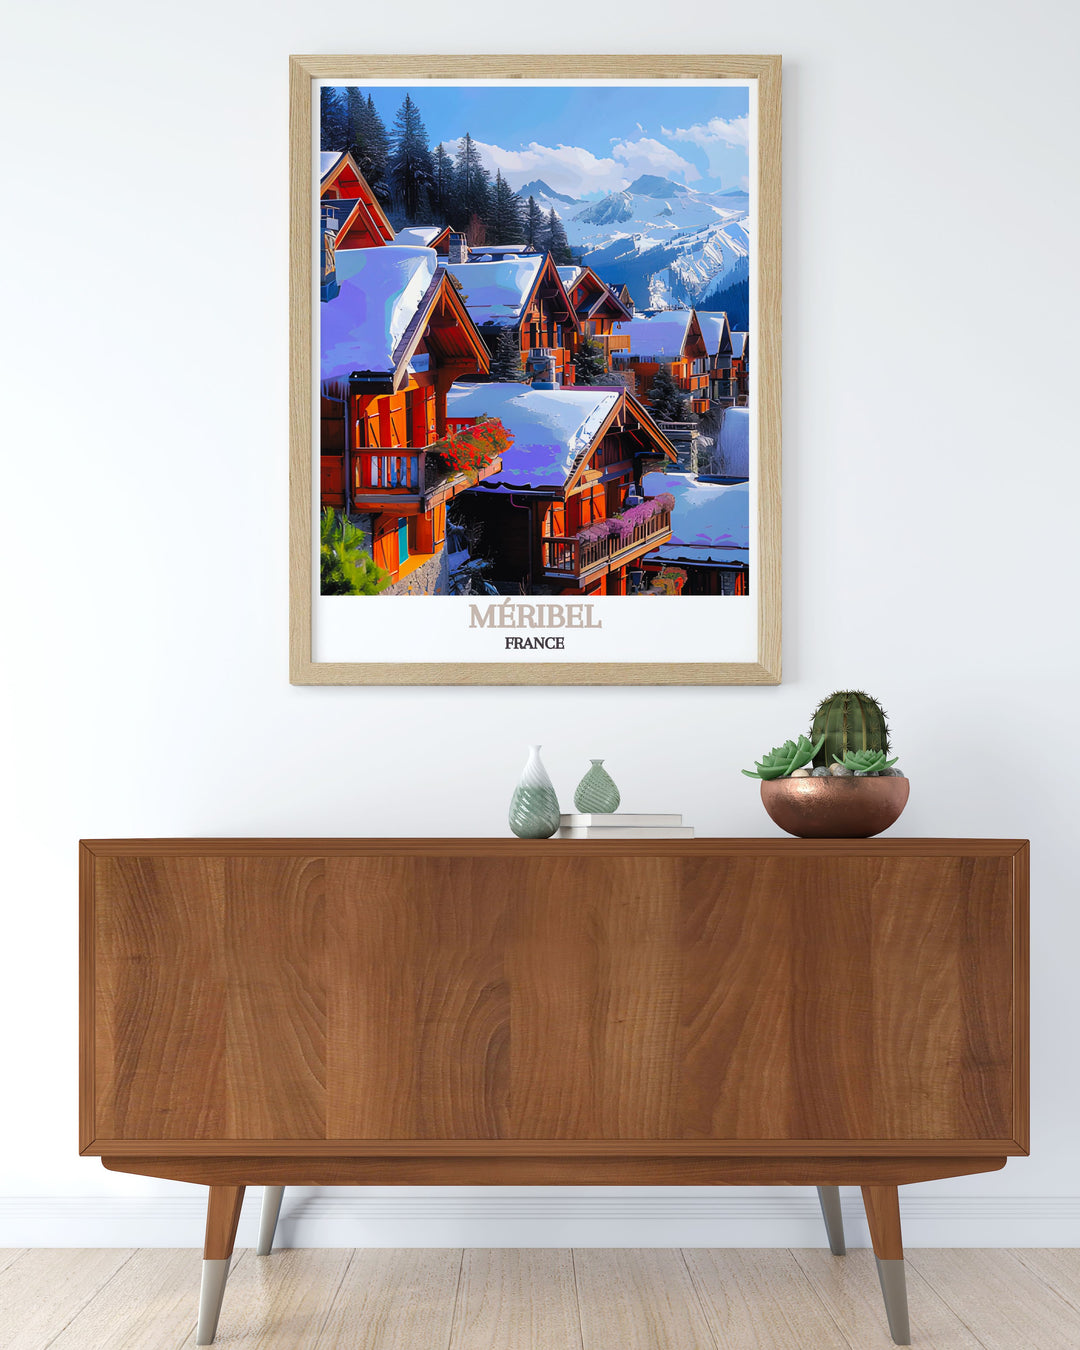 Experience the serene beauty of Méribel Village with this detailed poster, capturing its cozy ambiance and stunning views, perfect for adding a touch of alpine serenity to your home.